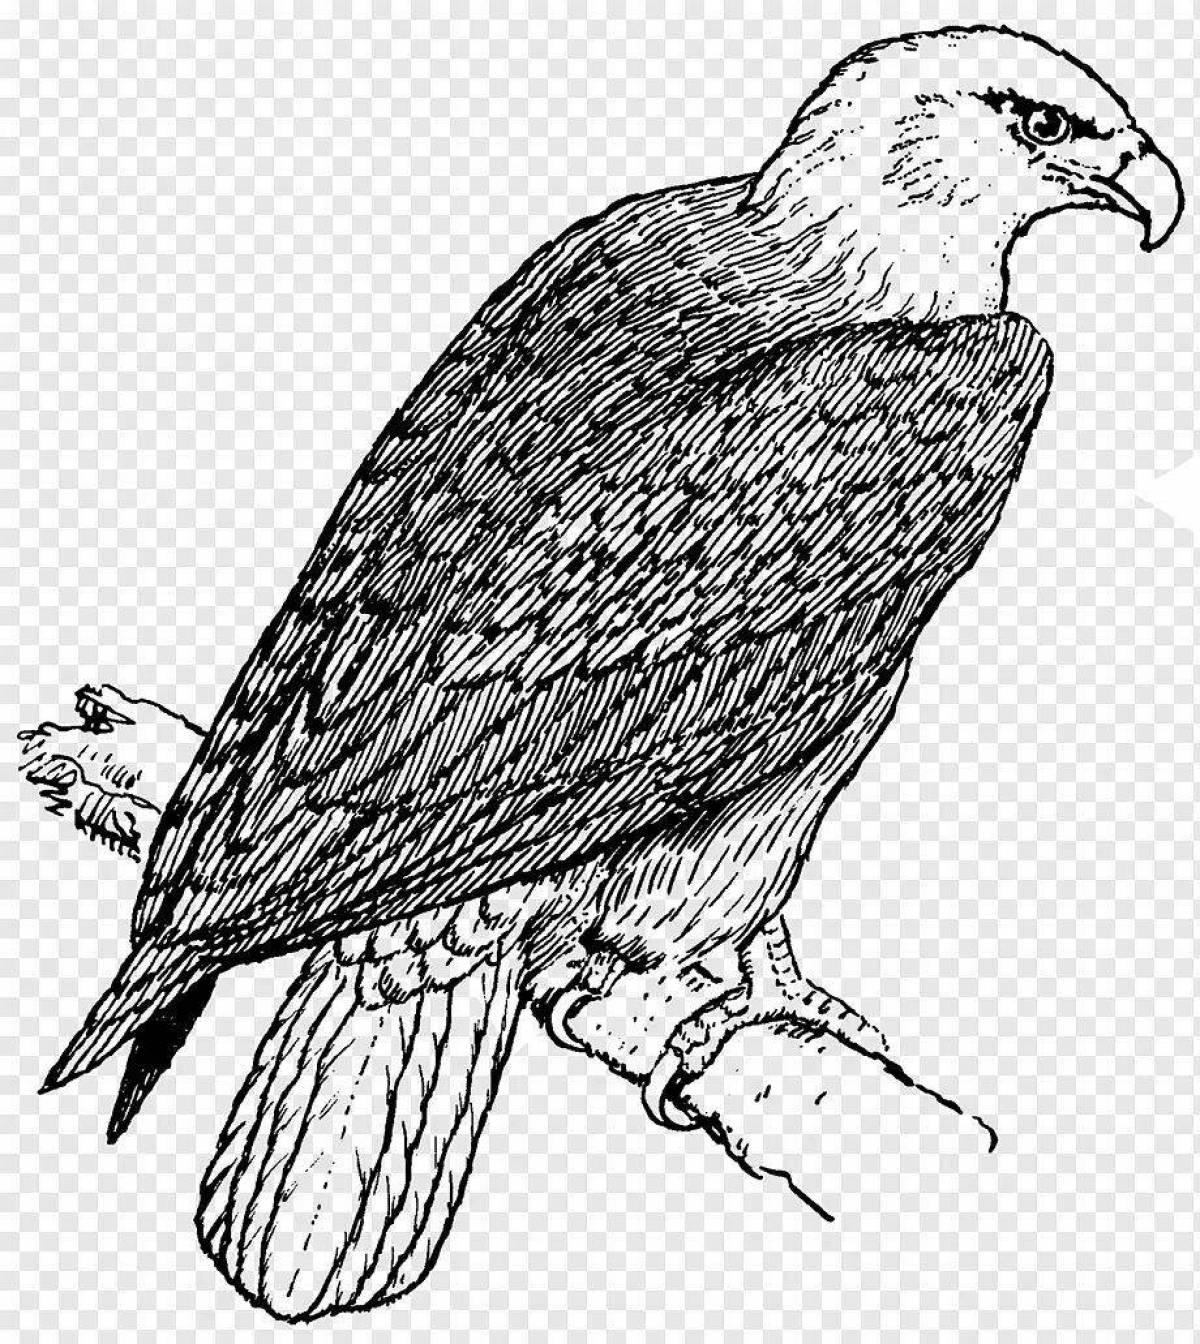 Coloring page of the mesmerizing falcon